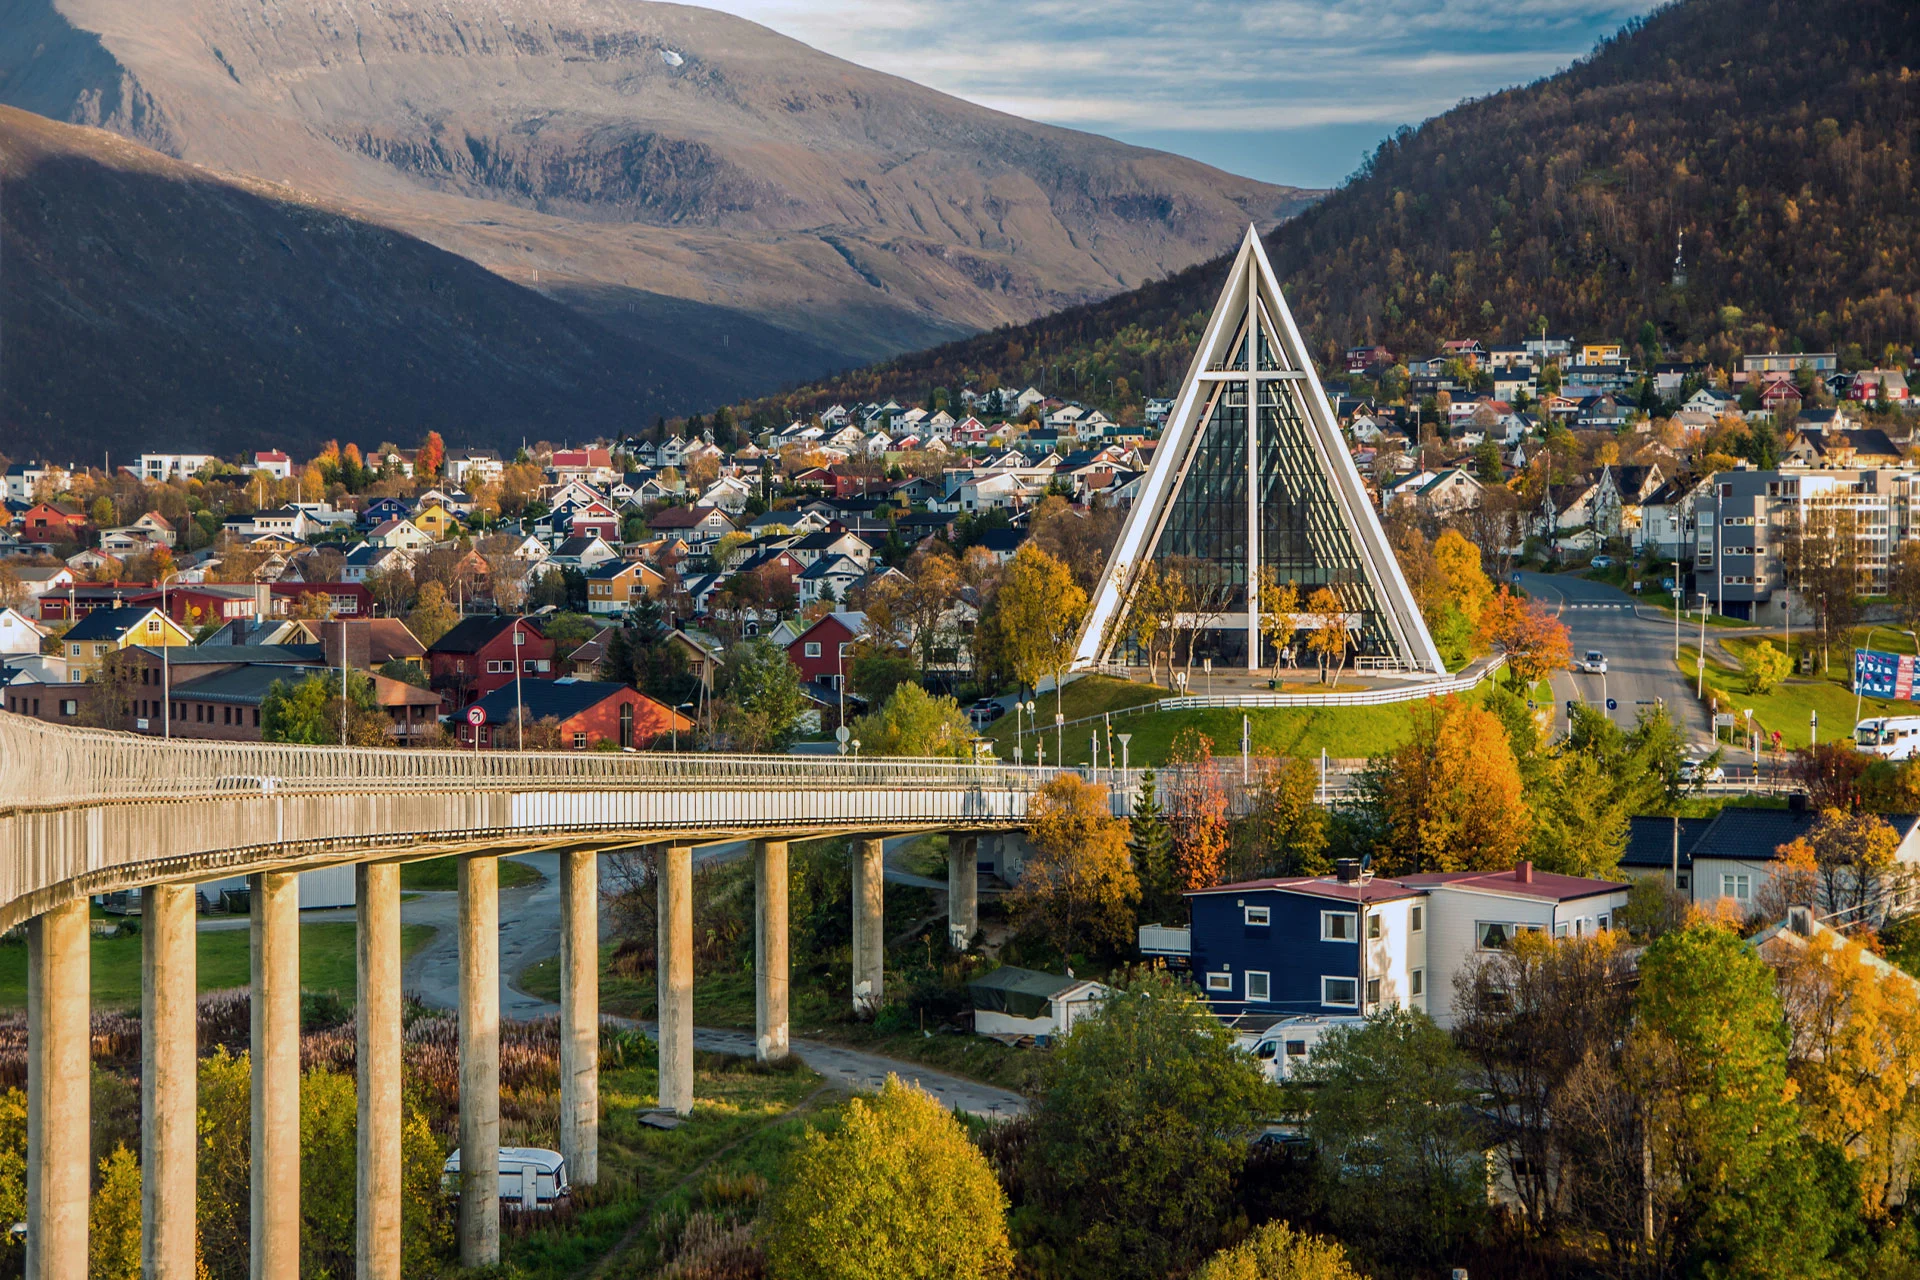 The Arctic Cathedral is the most impressive landmark in Tromso